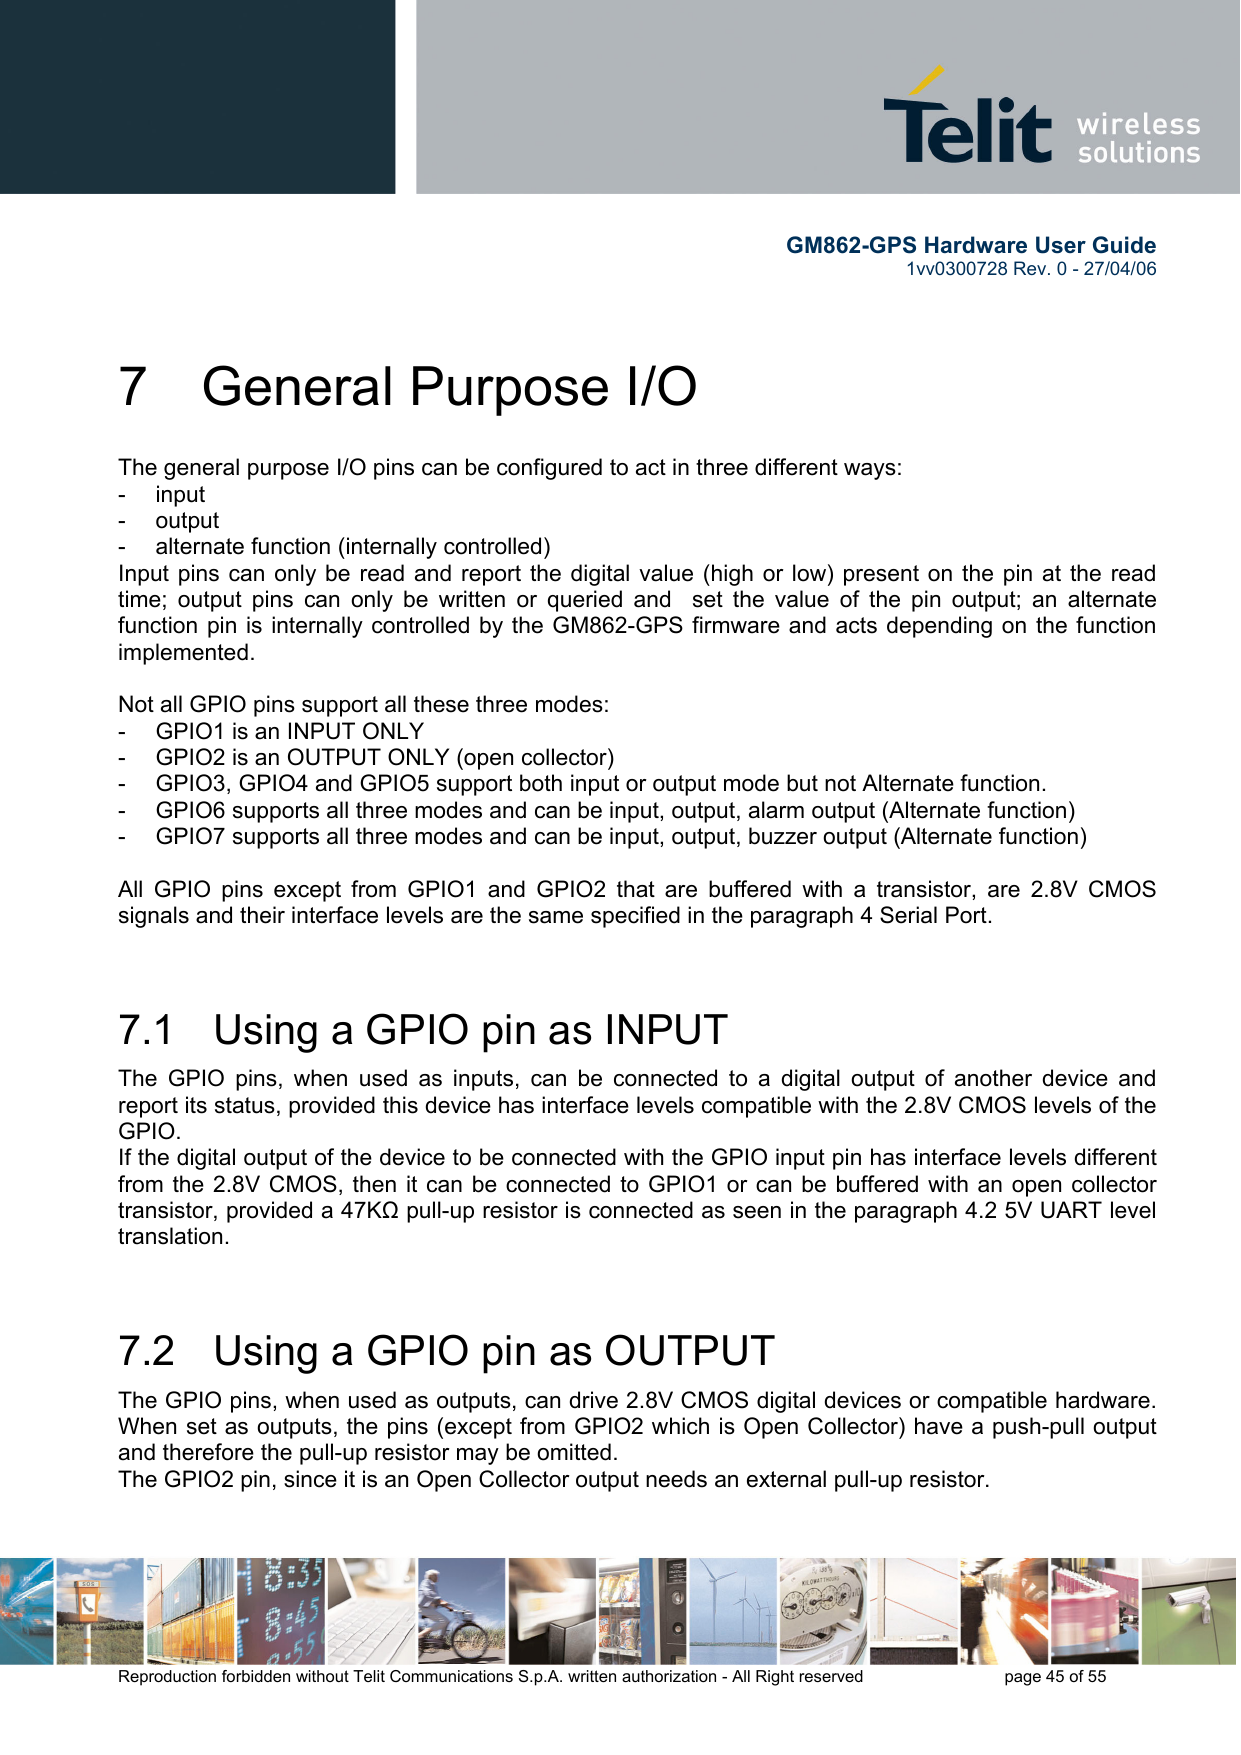        GM862-GPS Hardware User Guide   1vv0300728 Rev. 0 - 27/04/06    Reproduction forbidden without Telit Communications S.p.A. written authorization - All Right reserved    page 45 of 55  7 General Purpose I/O The general purpose I/O pins can be configured to act in three different ways: - input - output -  alternate function (internally controlled) Input pins can only be read and report the digital value (high or low) present on the pin at the read time; output pins can only be written or queried and  set the value of the pin output; an alternate function pin is internally controlled by the GM862-GPS firmware and acts depending on the function implemented.   Not all GPIO pins support all these three modes: -  GPIO1 is an INPUT ONLY -  GPIO2 is an OUTPUT ONLY (open collector) -  GPIO3, GPIO4 and GPIO5 support both input or output mode but not Alternate function. -  GPIO6 supports all three modes and can be input, output, alarm output (Alternate function) -  GPIO7 supports all three modes and can be input, output, buzzer output (Alternate function)  All GPIO pins except from GPIO1 and GPIO2 that are buffered with a transistor, are 2.8V CMOS signals and their interface levels are the same specified in the paragraph 4 Serial Port.  7.1   Using a GPIO pin as INPUT The GPIO pins, when used as inputs, can be connected to a digital output of another device and report its status, provided this device has interface levels compatible with the 2.8V CMOS levels of the GPIO.  If the digital output of the device to be connected with the GPIO input pin has interface levels different from the 2.8V CMOS, then it can be connected to GPIO1 or can be buffered with an open collector transistor, provided a 47KΩ pull-up resistor is connected as seen in the paragraph 4.2 5V UART level translation.  7.2   Using a GPIO pin as OUTPUT The GPIO pins, when used as outputs, can drive 2.8V CMOS digital devices or compatible hardware. When set as outputs, the pins (except from GPIO2 which is Open Collector) have a push-pull output and therefore the pull-up resistor may be omitted. The GPIO2 pin, since it is an Open Collector output needs an external pull-up resistor.  